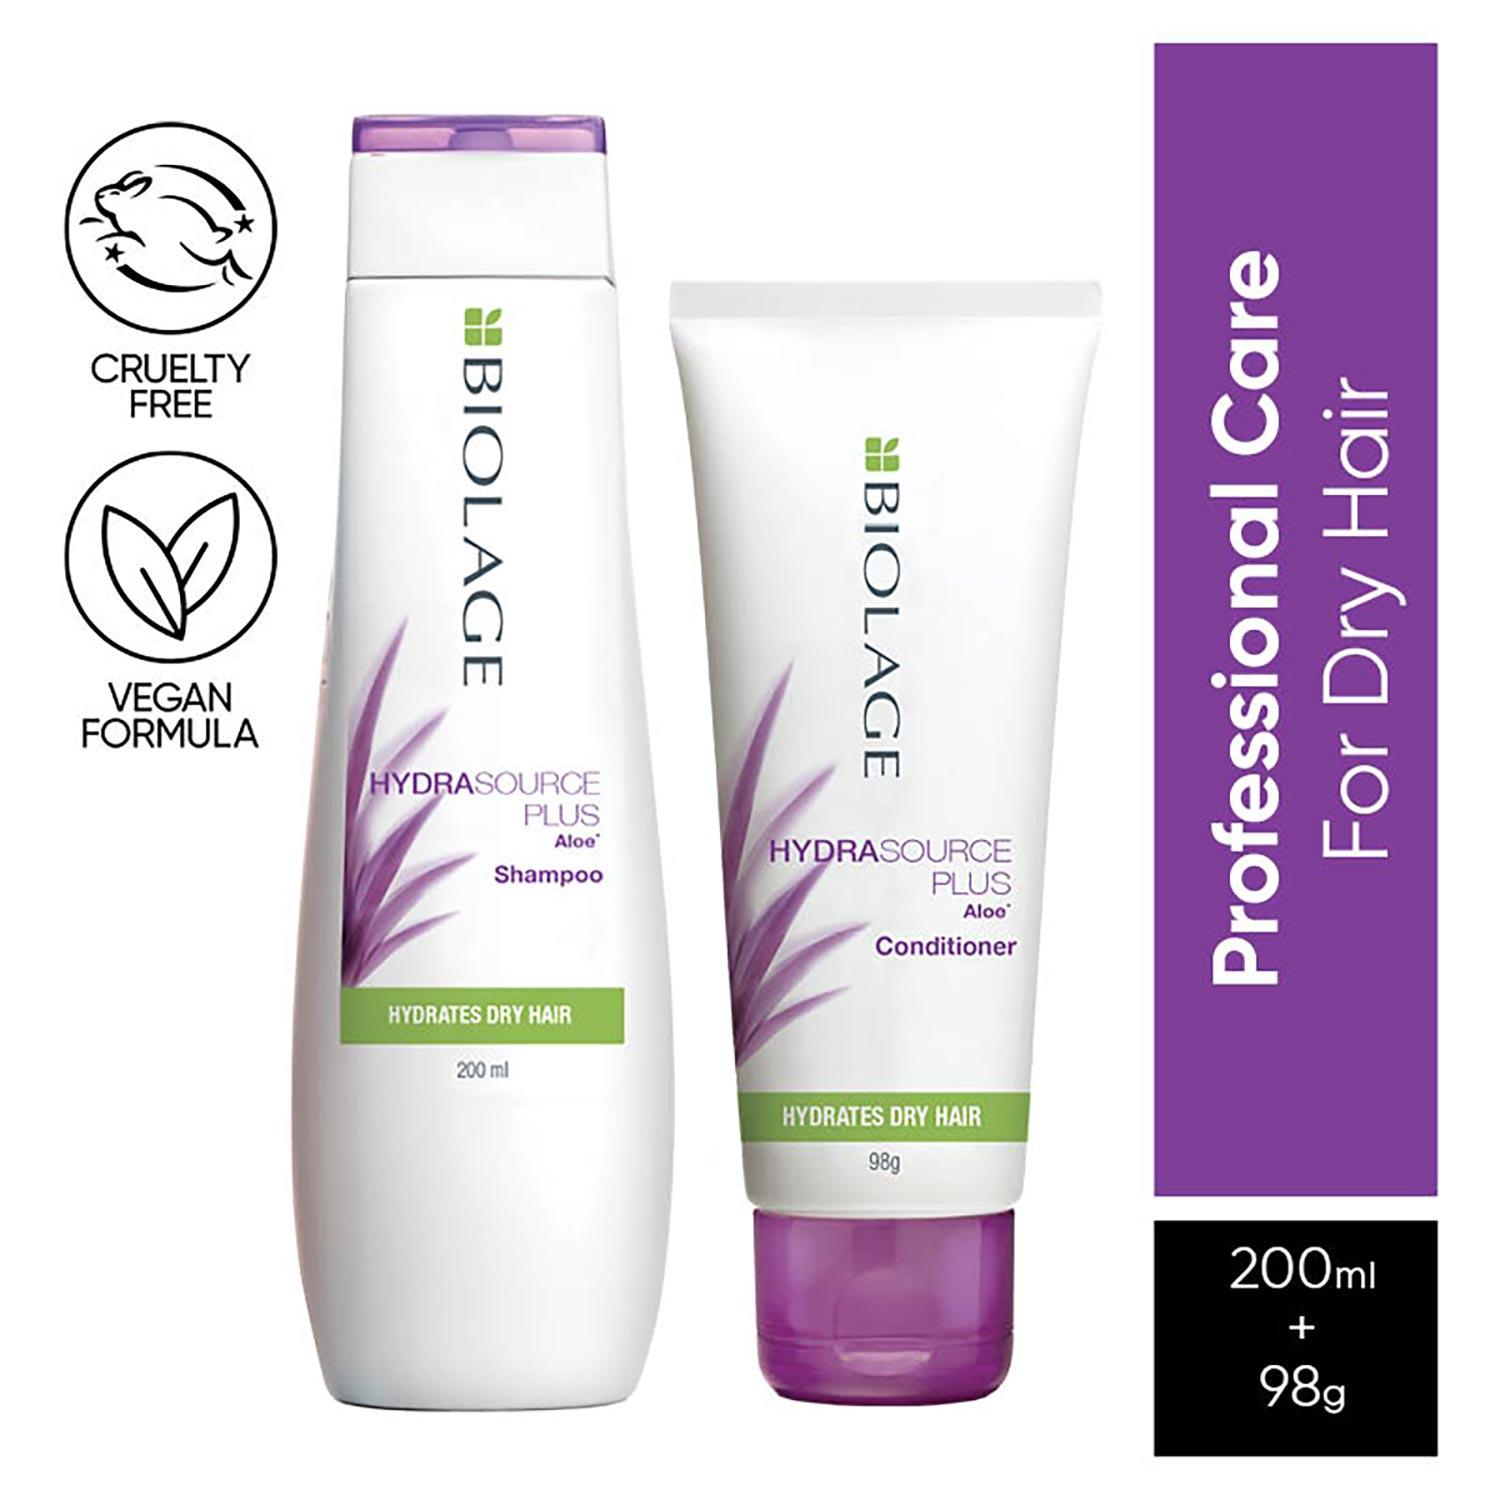 Biolage | Biolage Hydrasource Shampoo & Conditioner Combo Enriched with Aloe for Dry Hair (200 ml + 98 g)